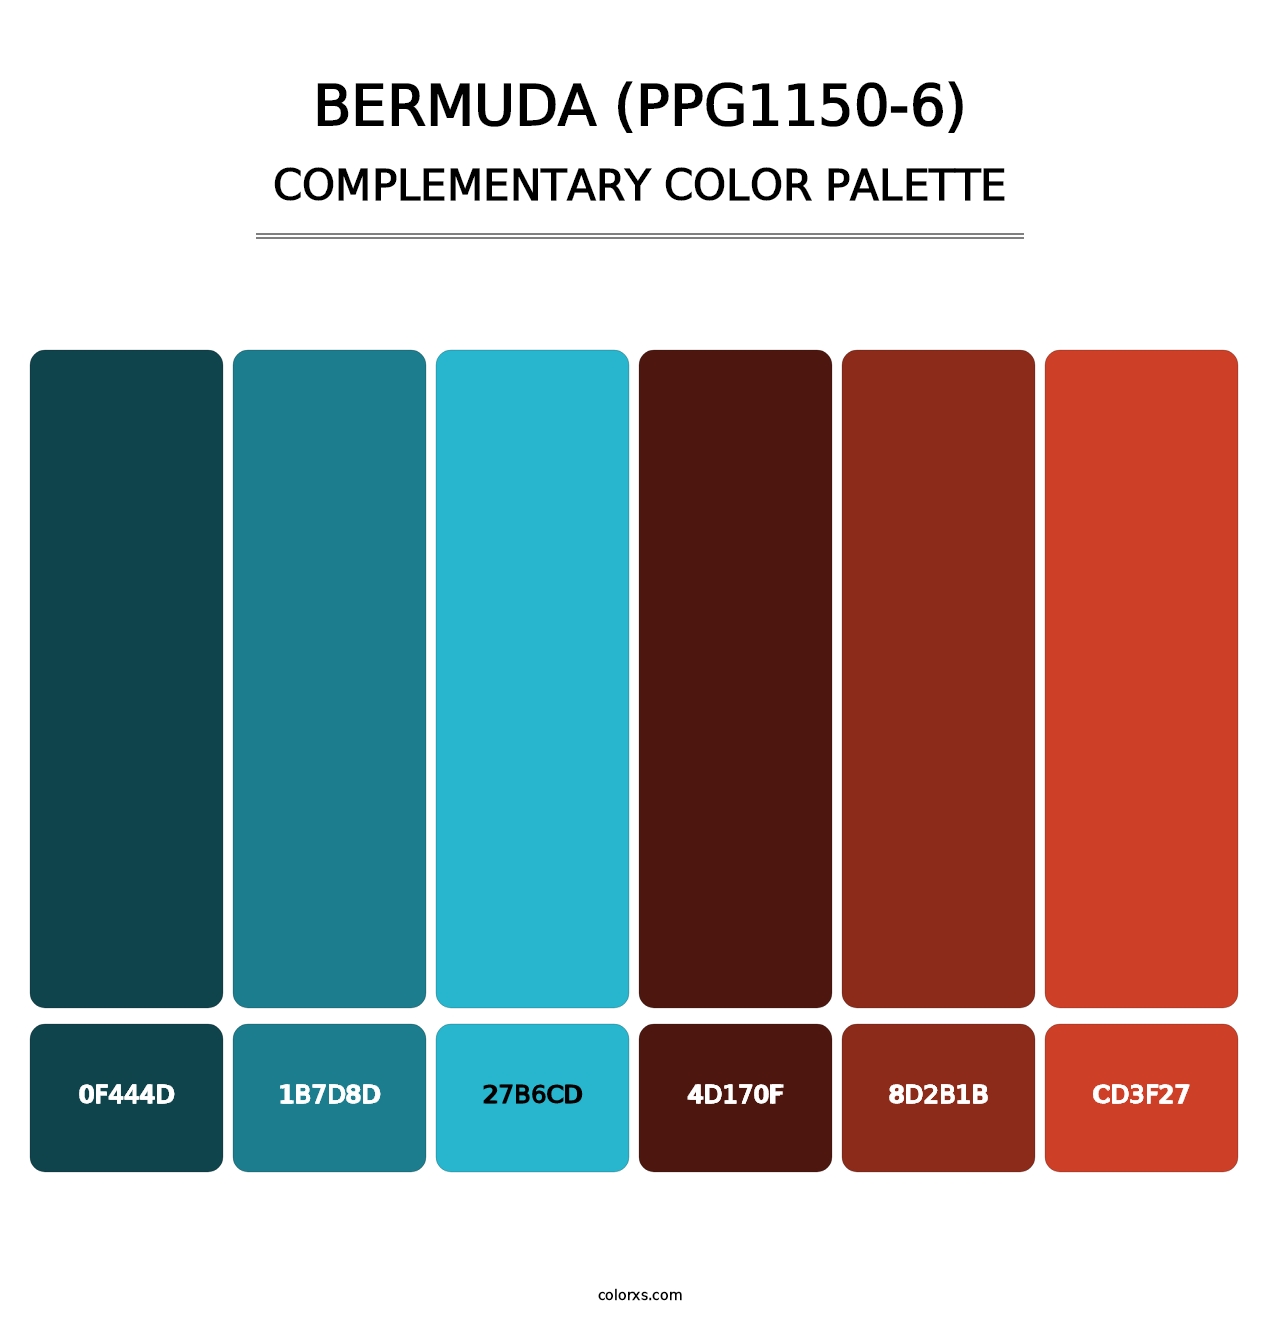 Bermuda (PPG1150-6) - Complementary Color Palette